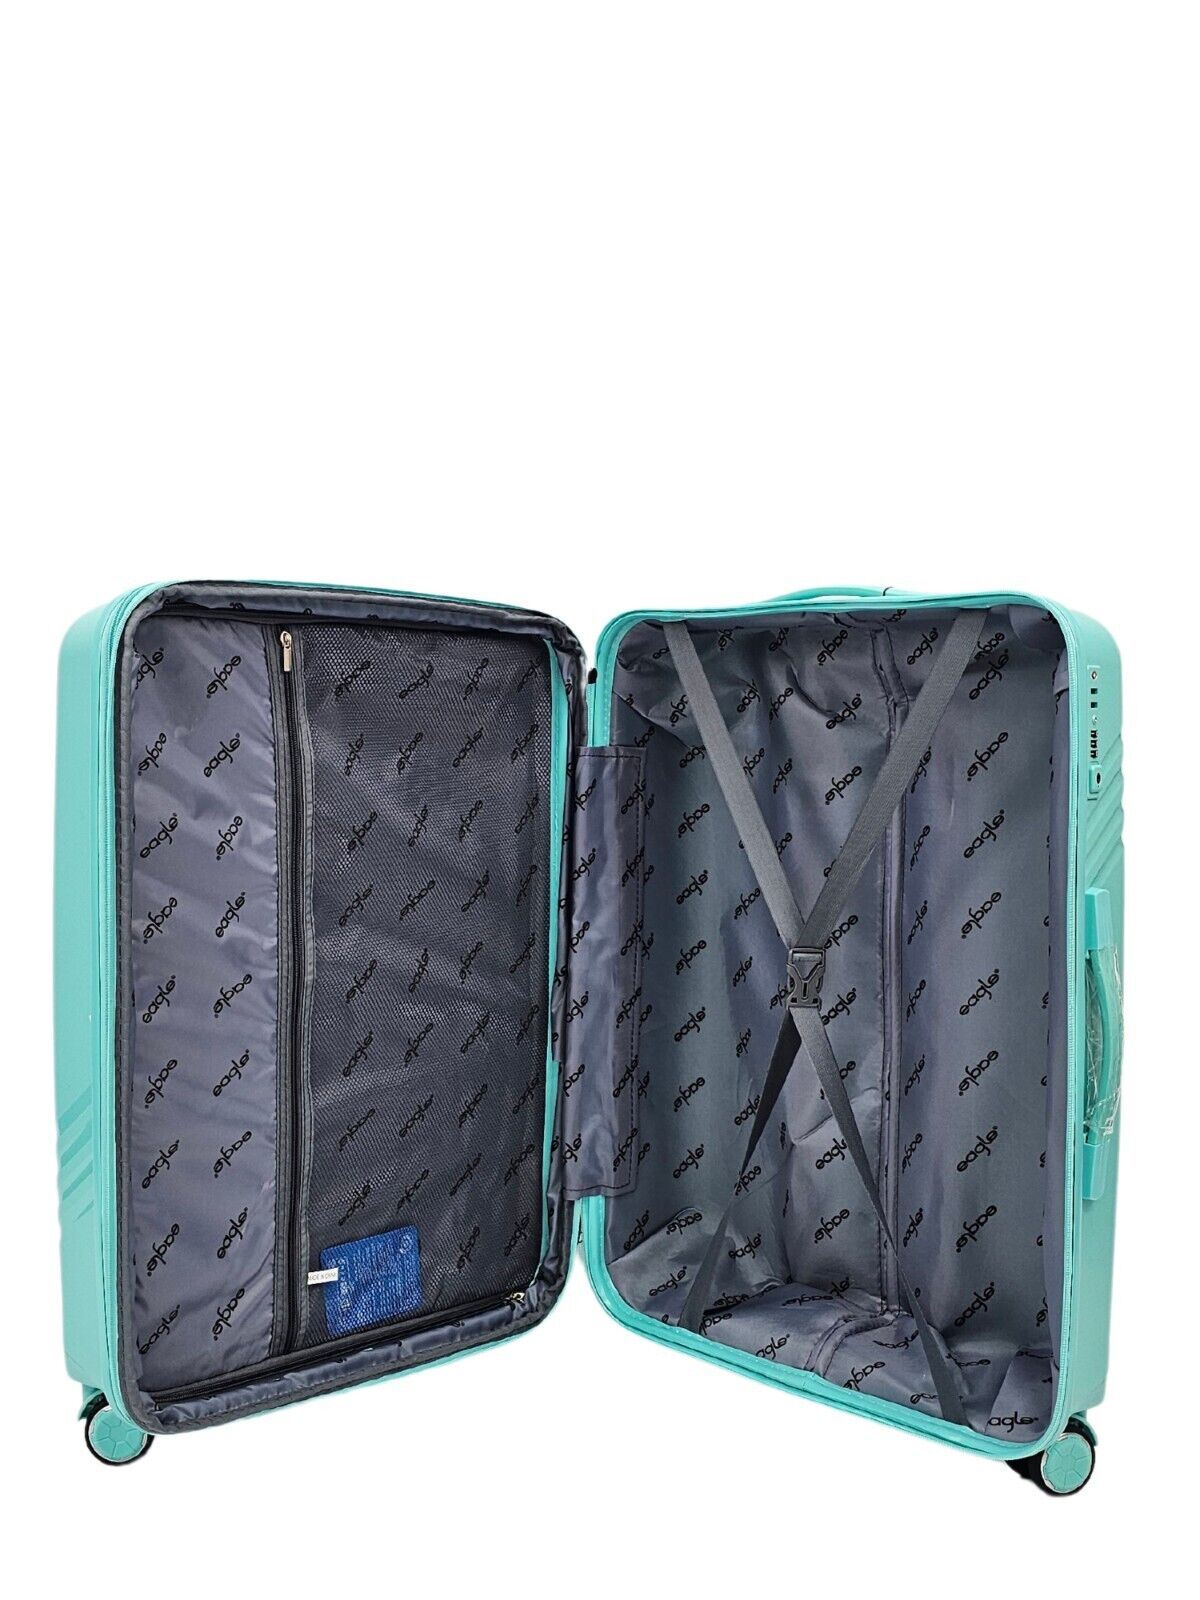 Brookwood Large Hard Shell Suitcase in Teal